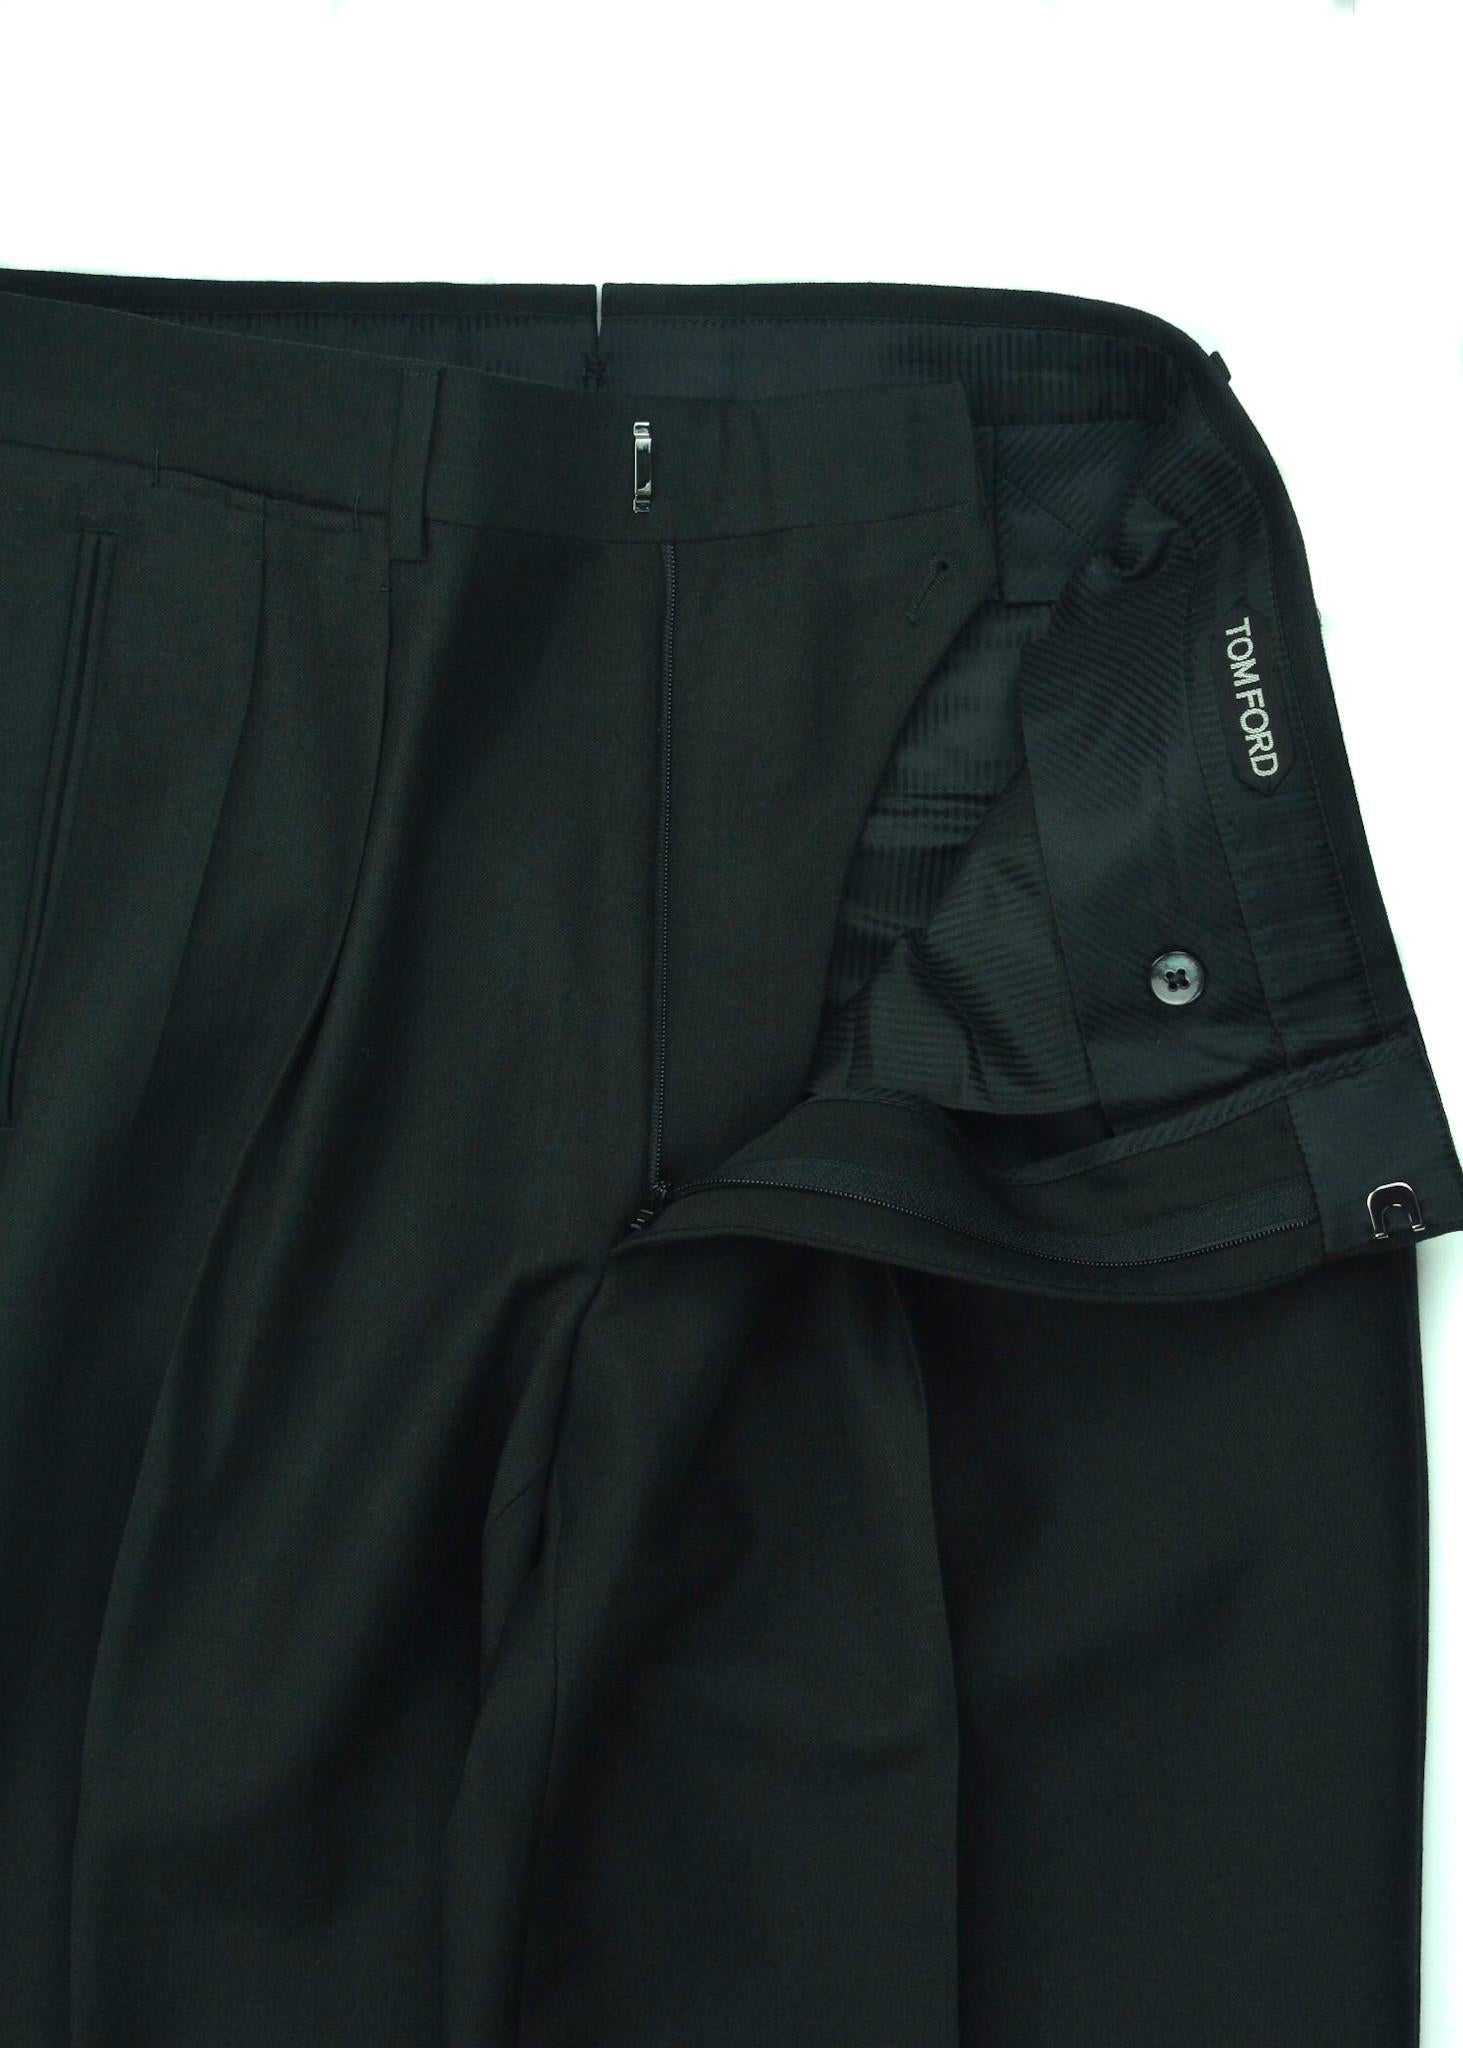 Tom Ford Mens Black Wool Blend Pleated Trousers In New Condition For Sale In Brooklyn, NY